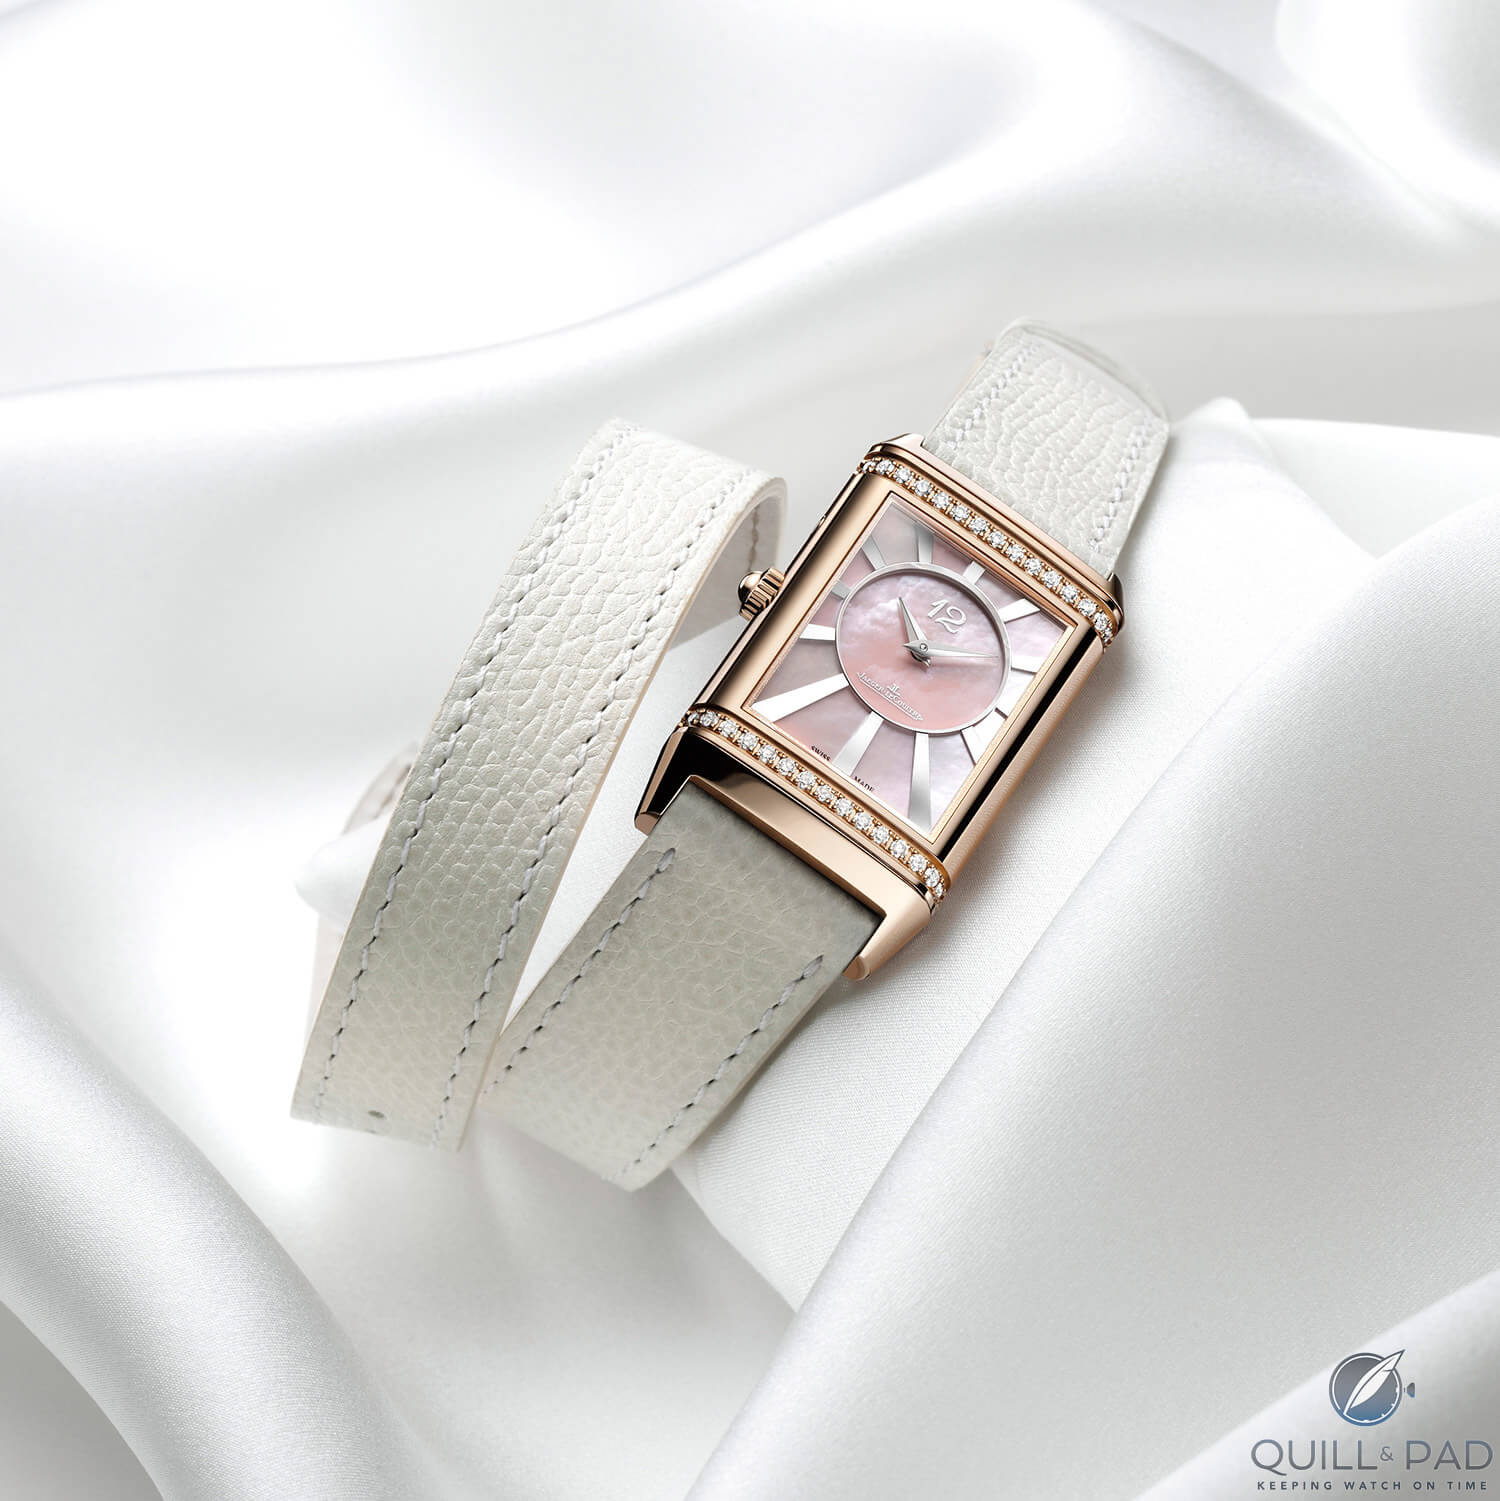  Jaeger-LeCoultre Grande Reverso Lady Ultra Thin Duetto Duo on white Valextra strap